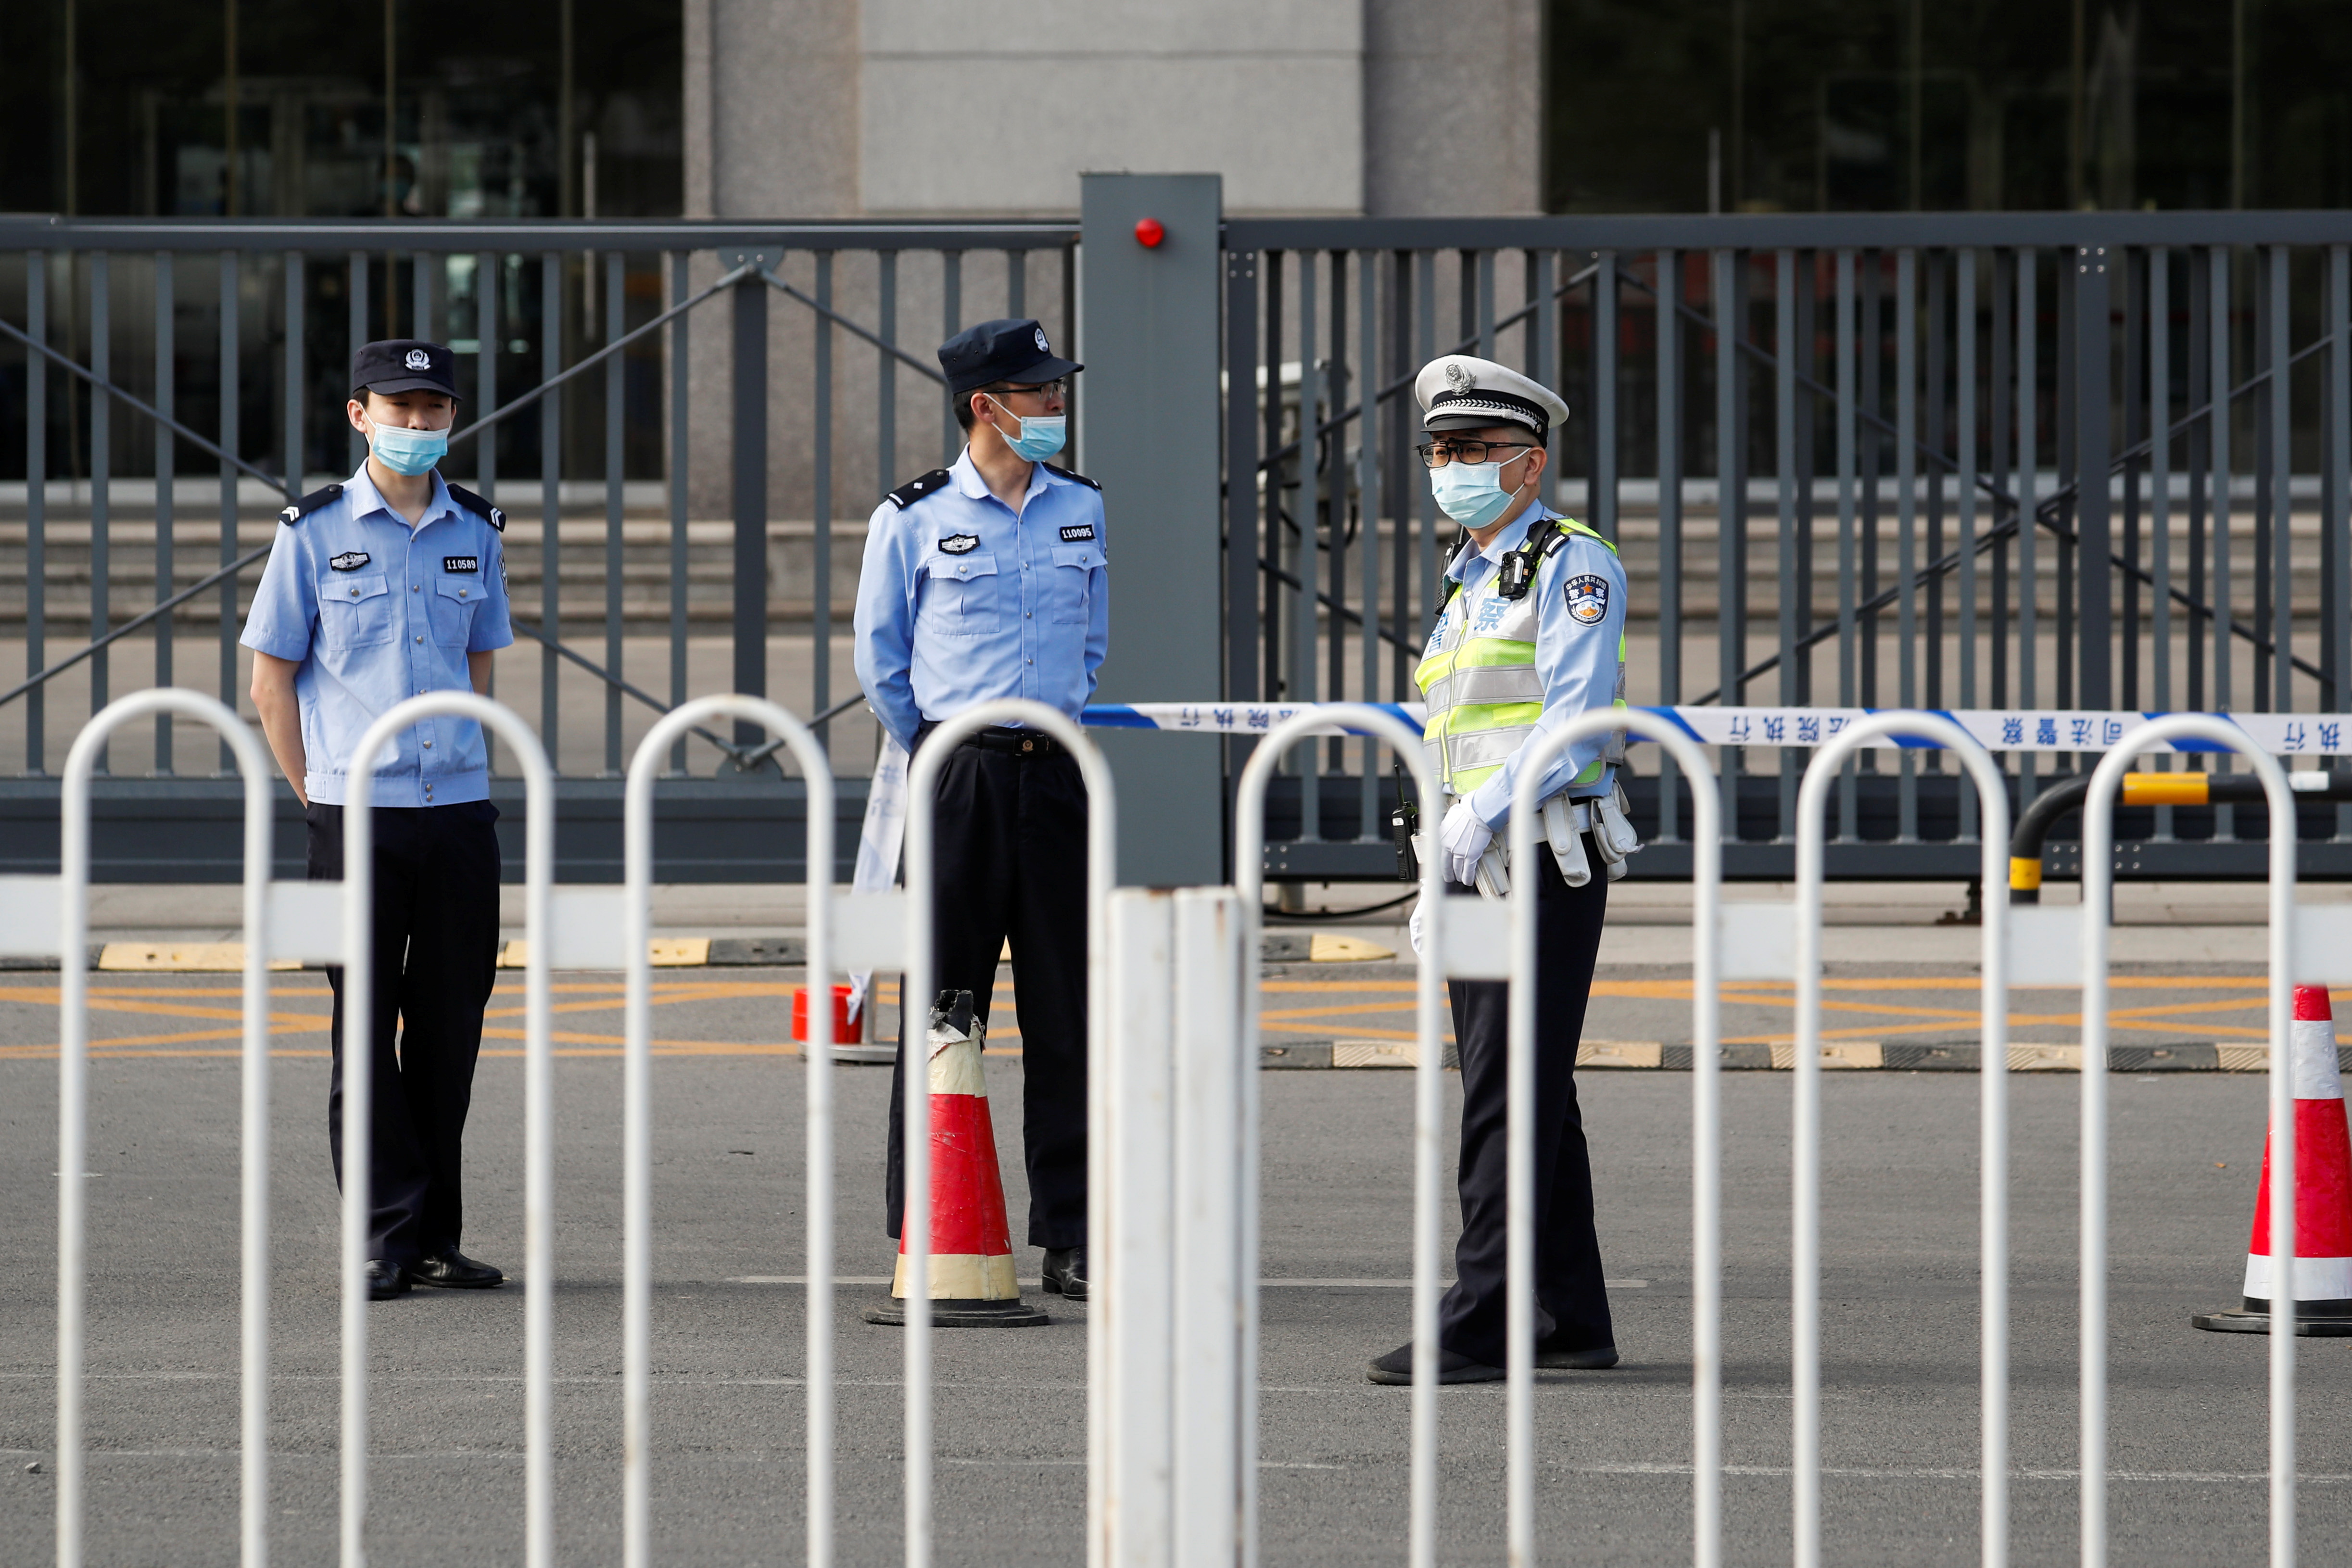 Police officers stand guard outside Beijing No. 2 Intermediate People's Court where Australian writer Yang Hengjun is expected to face trial on espionage charges, in Beijing